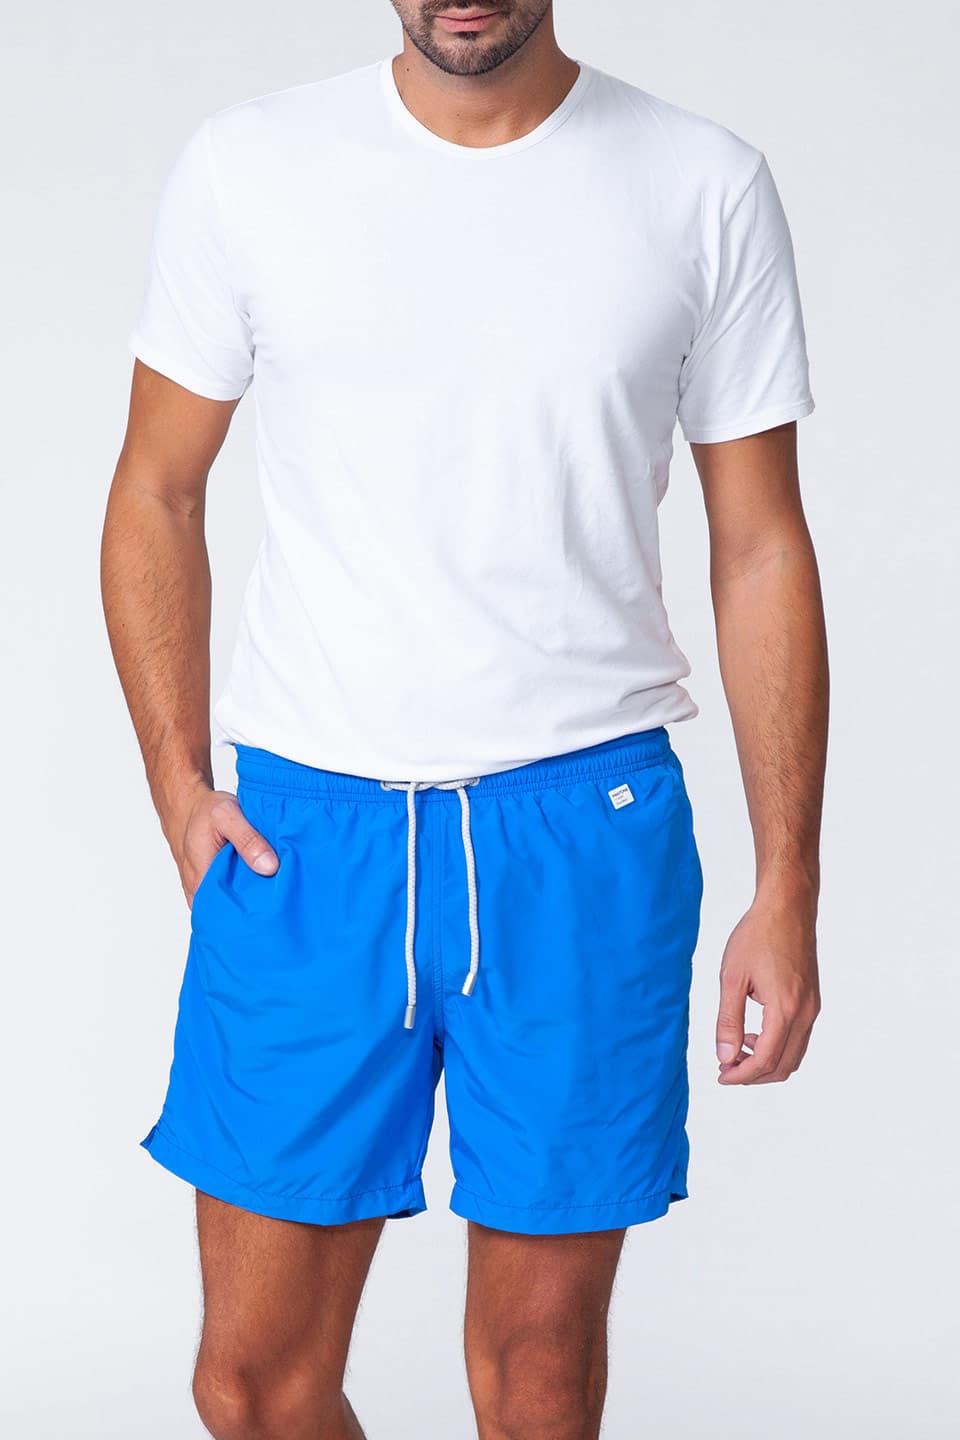 Thumbnail for Product gallery 1, Shop online exclusive swim shorts for men in blue color